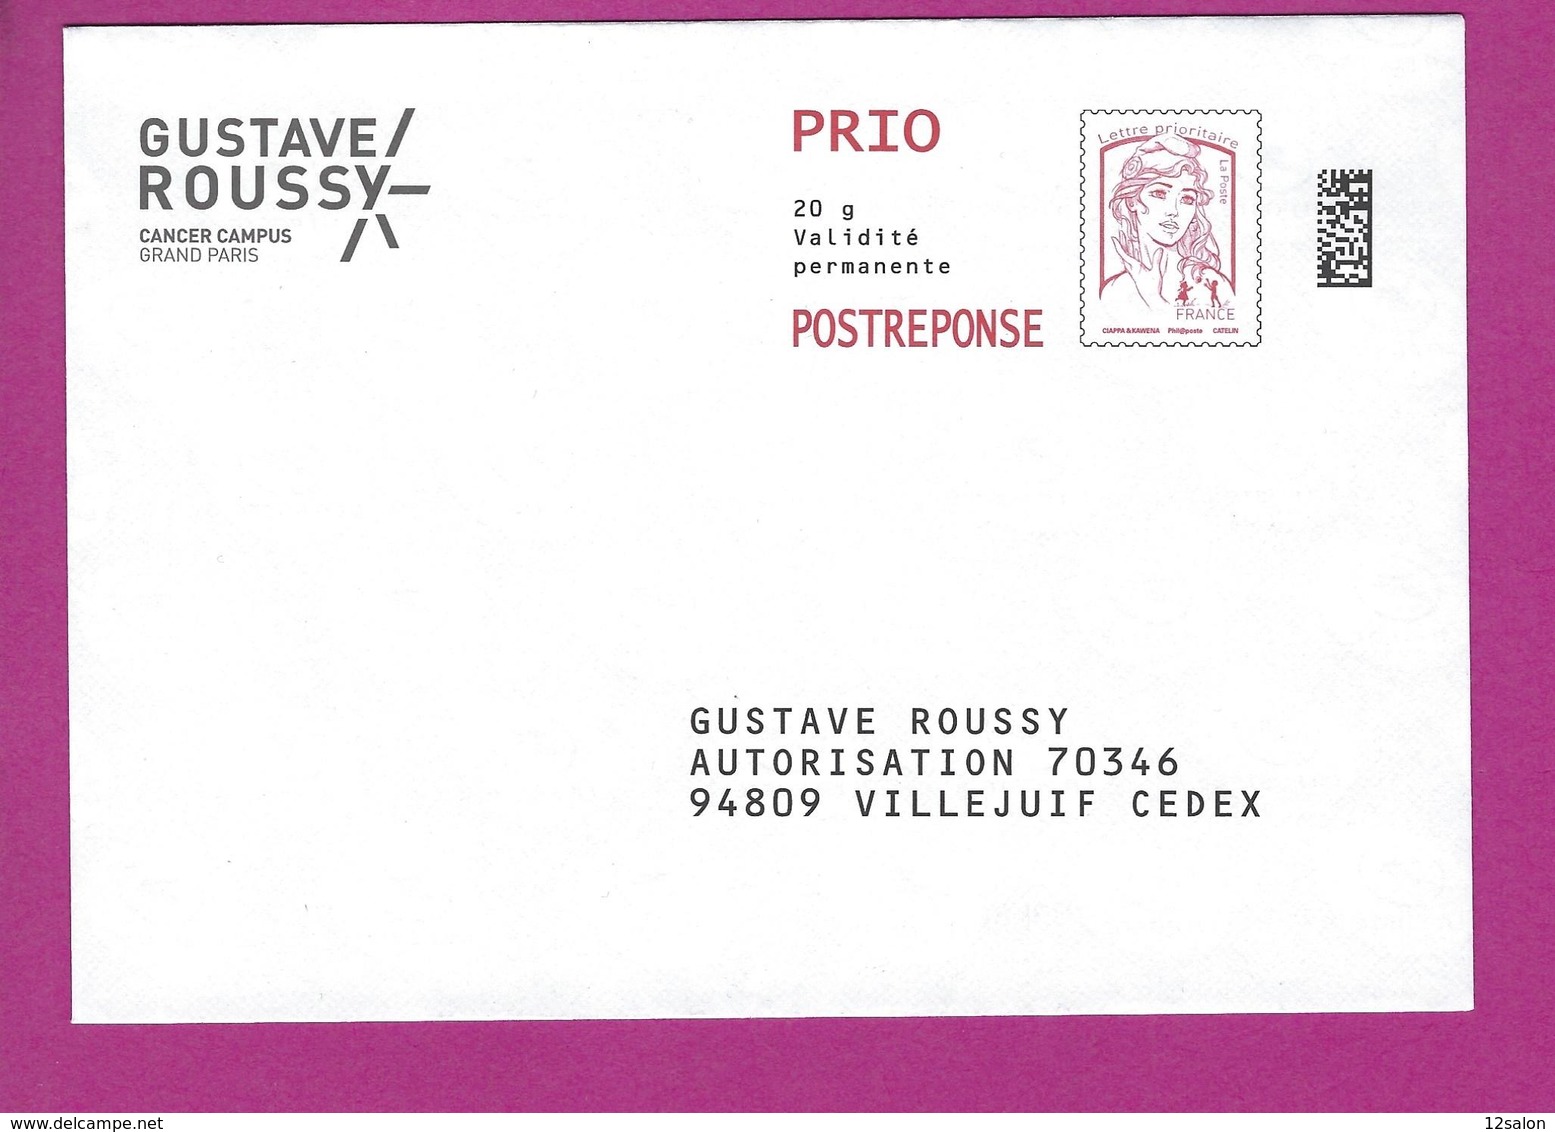 ENTIERS POSTAUX PRET A POSTER REPONSE MARIANNE CIAPPA GUSTAVE ROUSSY CANCER - Buste Risposta T